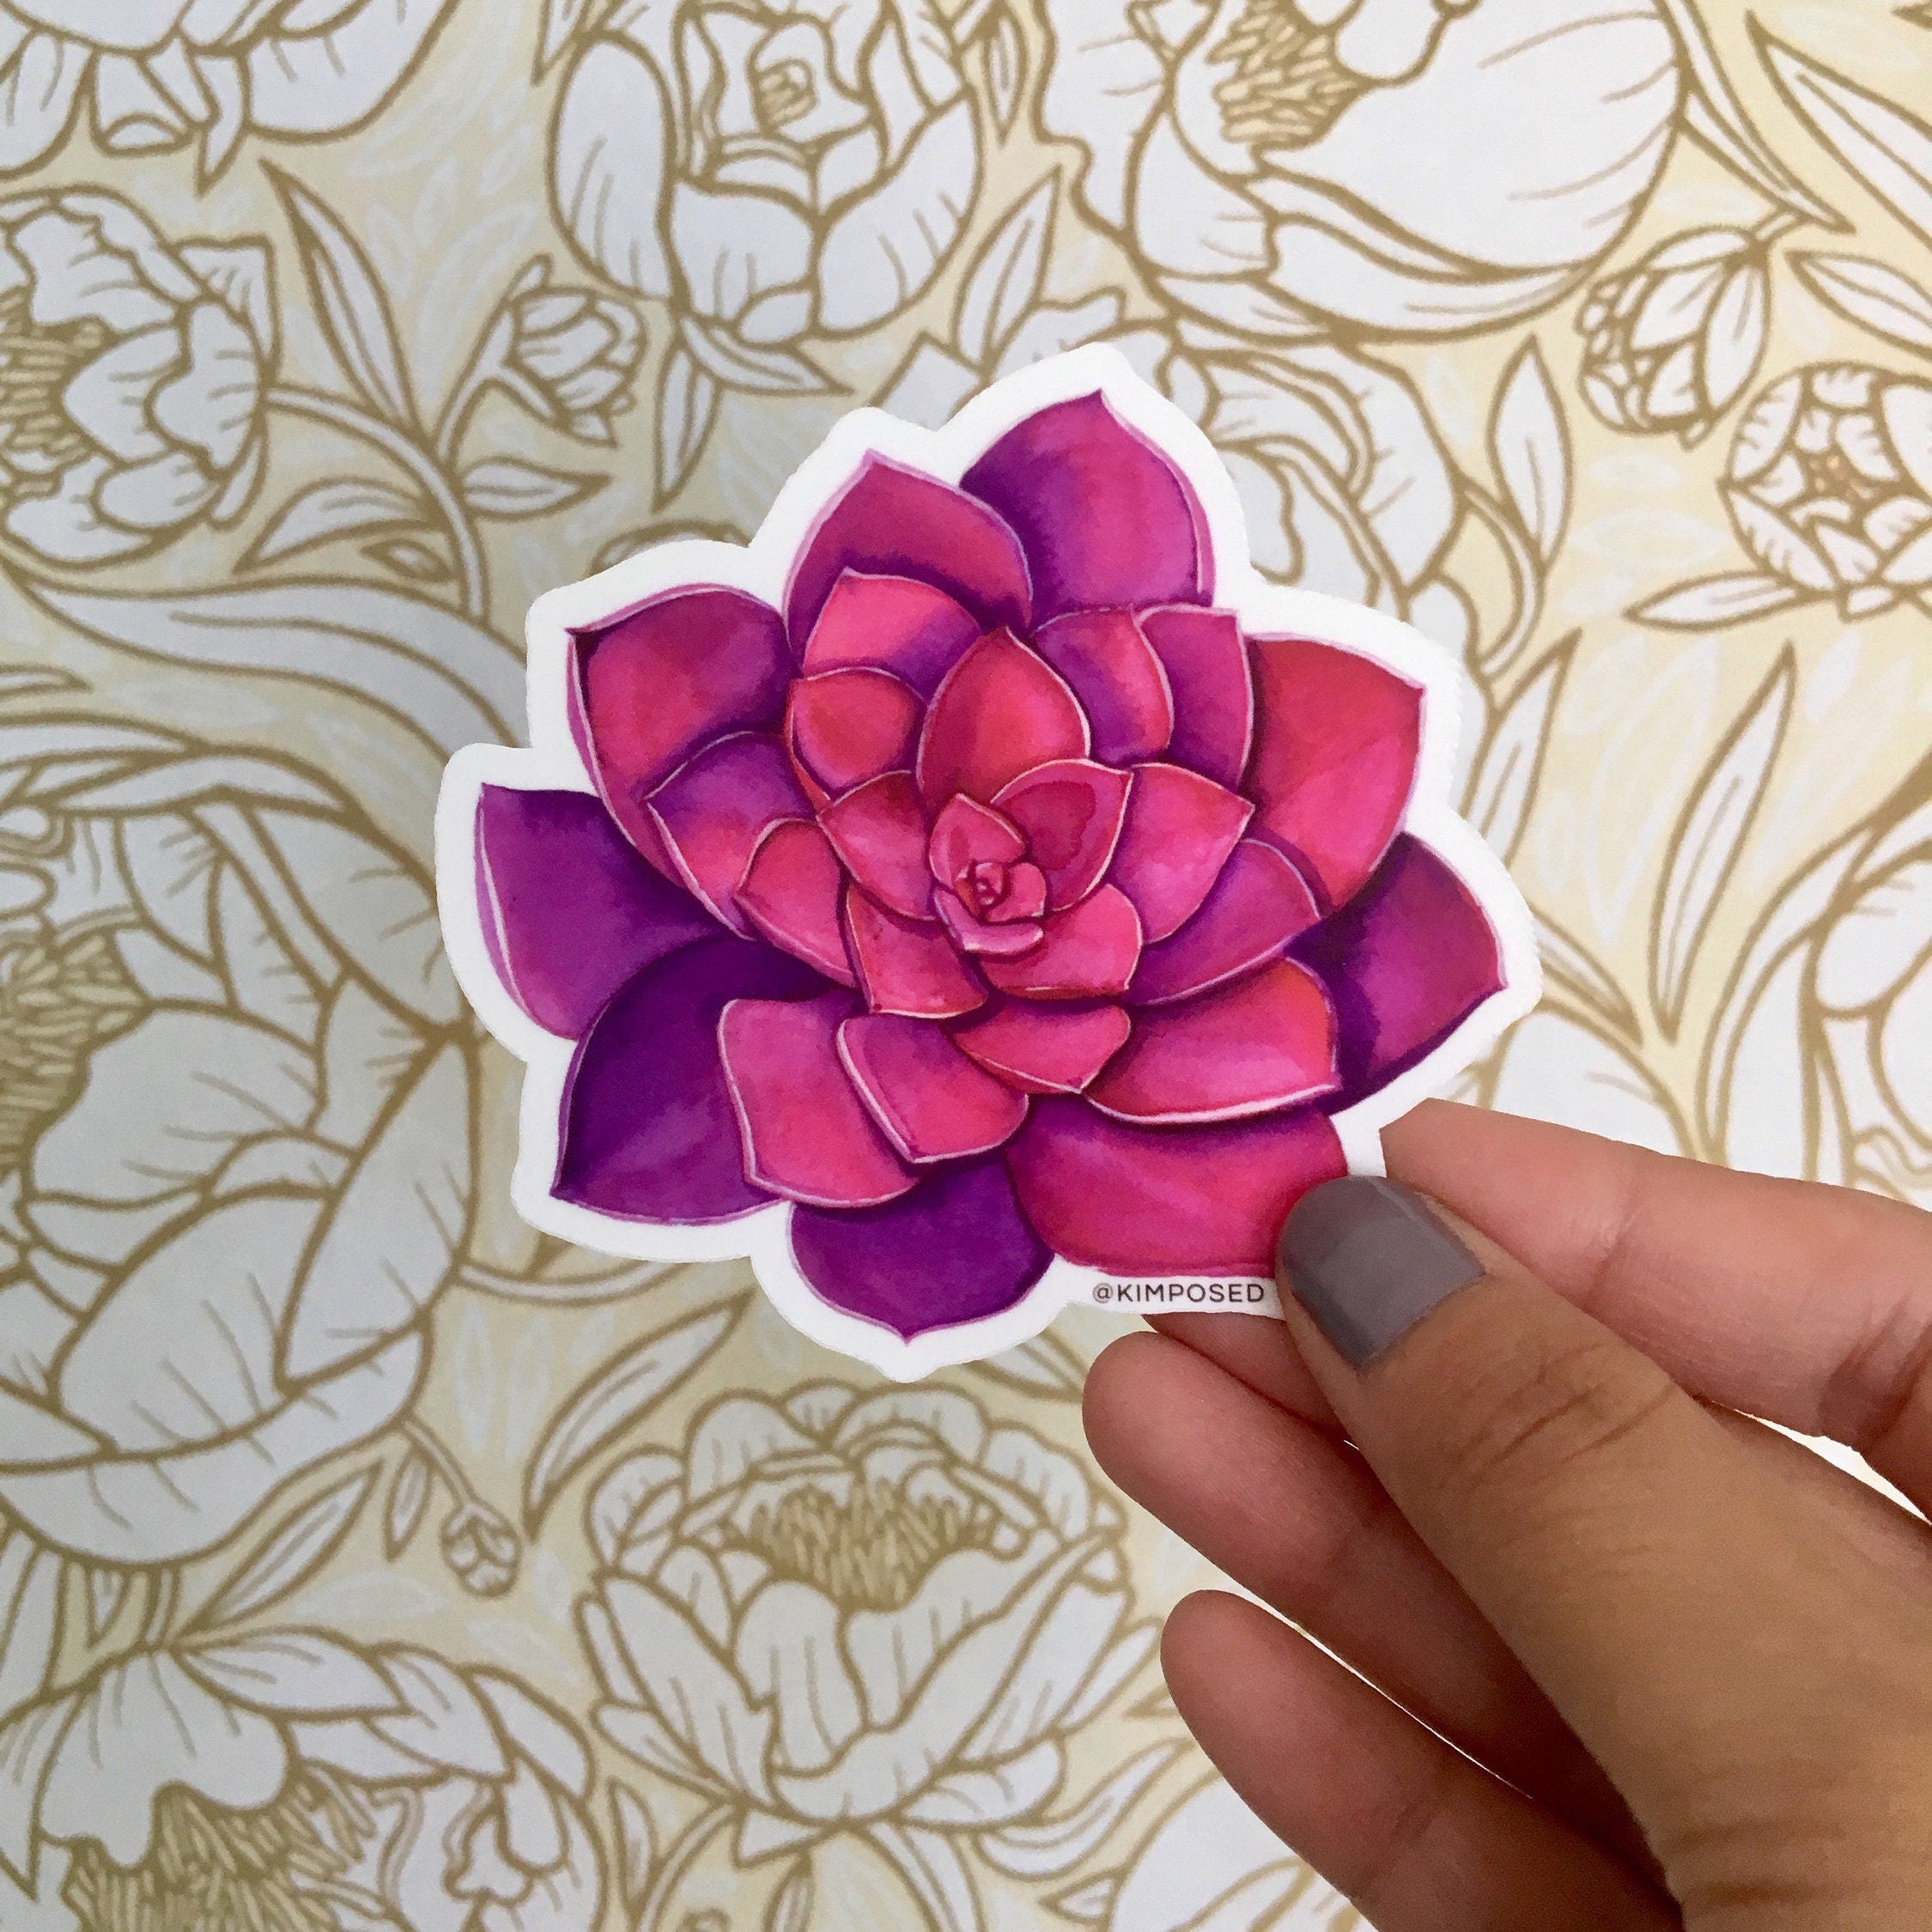 Pink and Purple Succulent 3" Waterproof Vinyl Sticker for Water Bottles, Laptops, Phones & More **FREE USA SHIPPING**